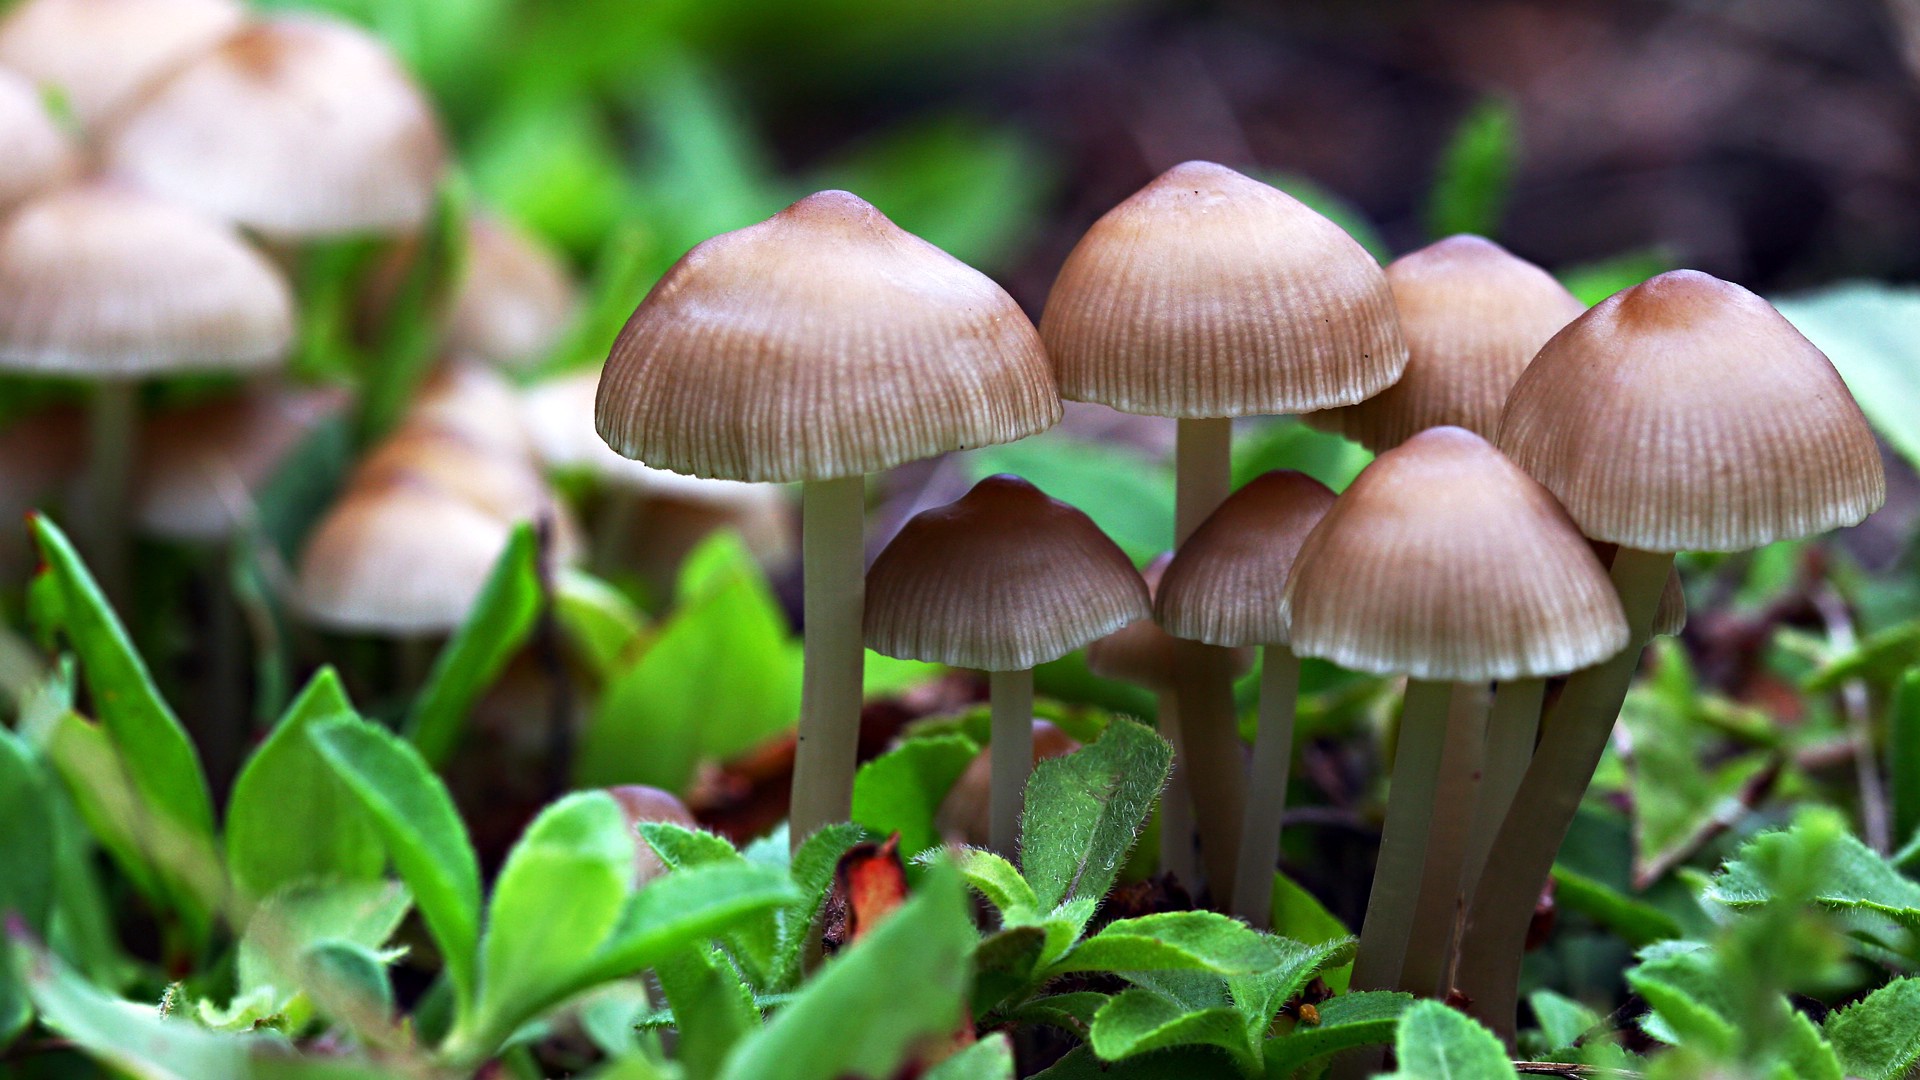 If you want to buy the magic mushroom (champignon magique), you can take advantage of the best offers